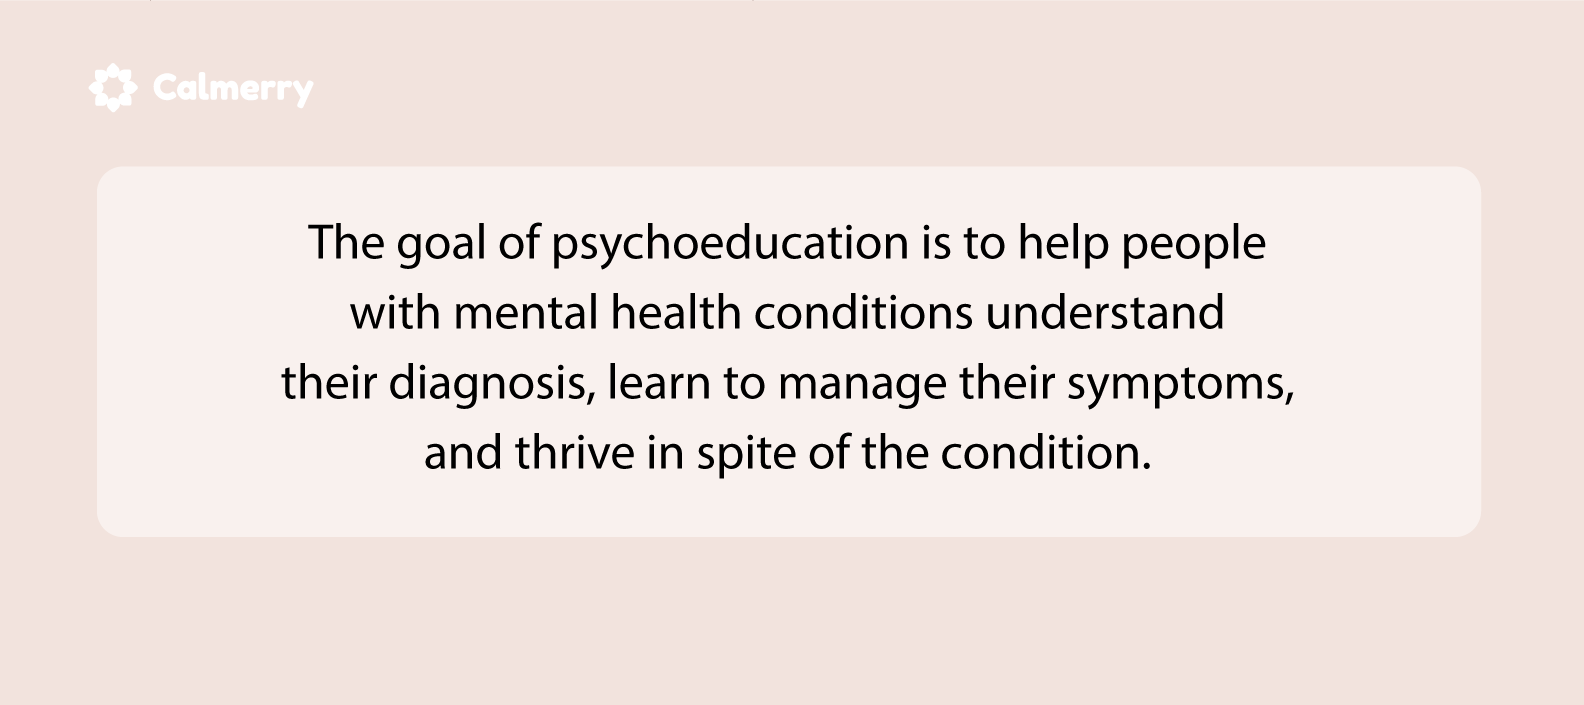 The goal of psychoeducation is to help people with mental health conditions understand their diagnosis, learn to manage their symptoms, and thrive in spite of the condition. 